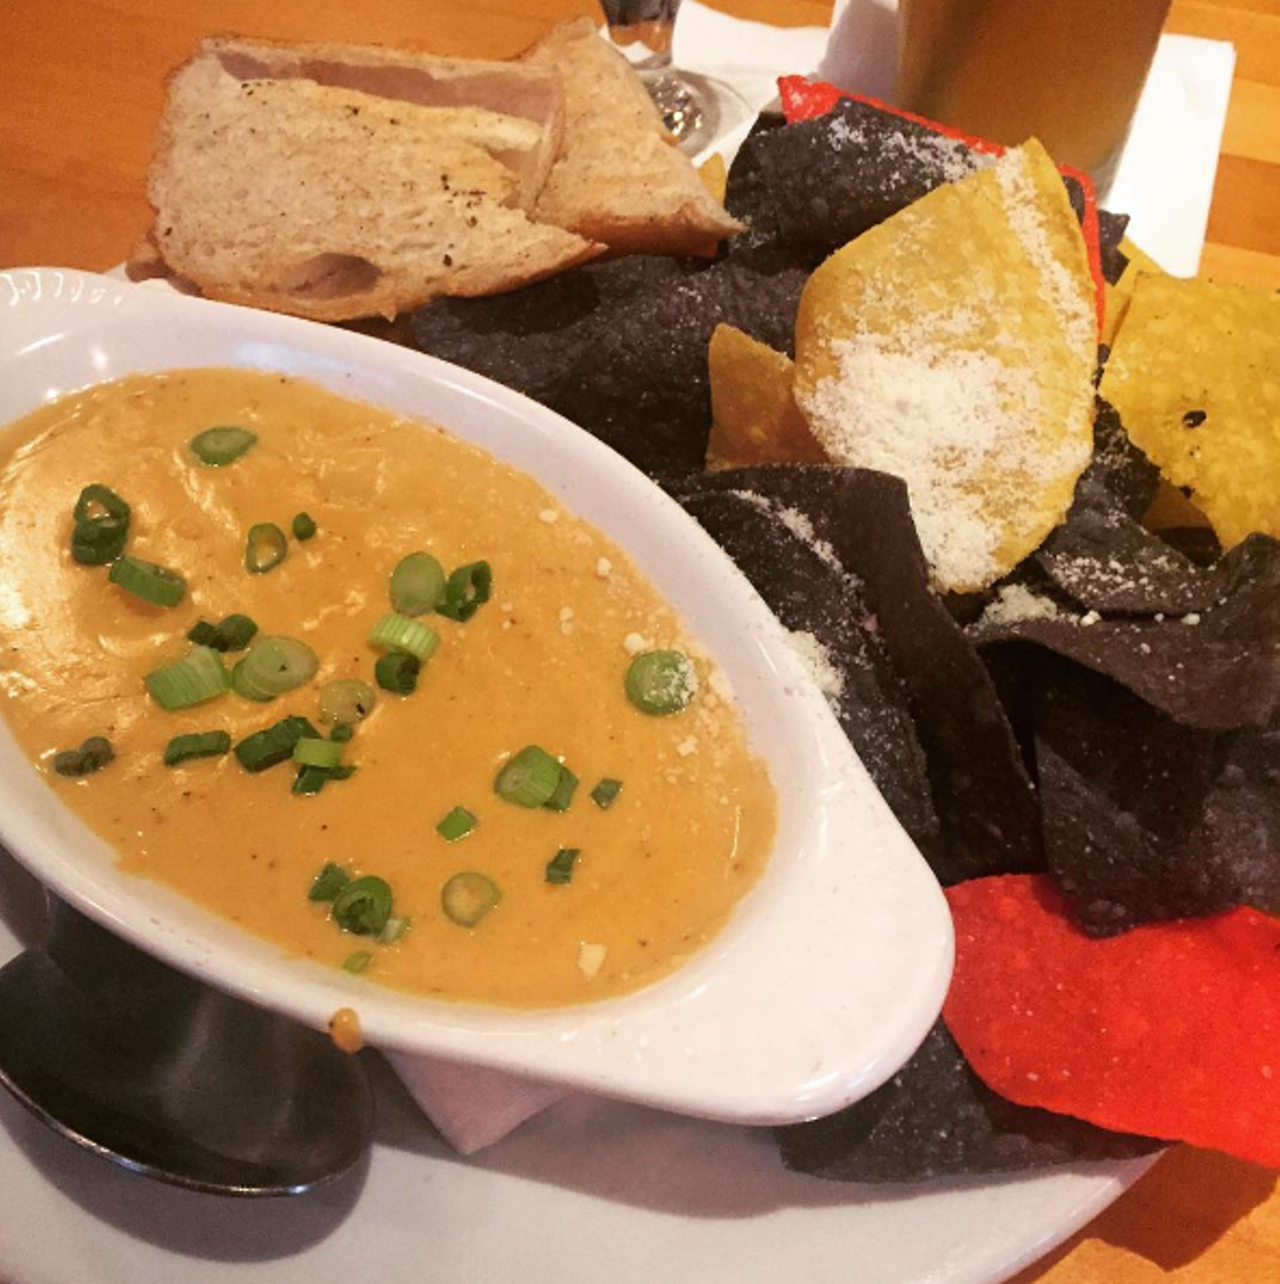 Irish Stout sharp cheddar chip from Dexter&#146;s
Multiple locations
A hot bowl of sharp cheddar with Irish Stout beer, garlic, heavy cream served with toasted French bread.
Photo via tattoosandtruffles/Instagram